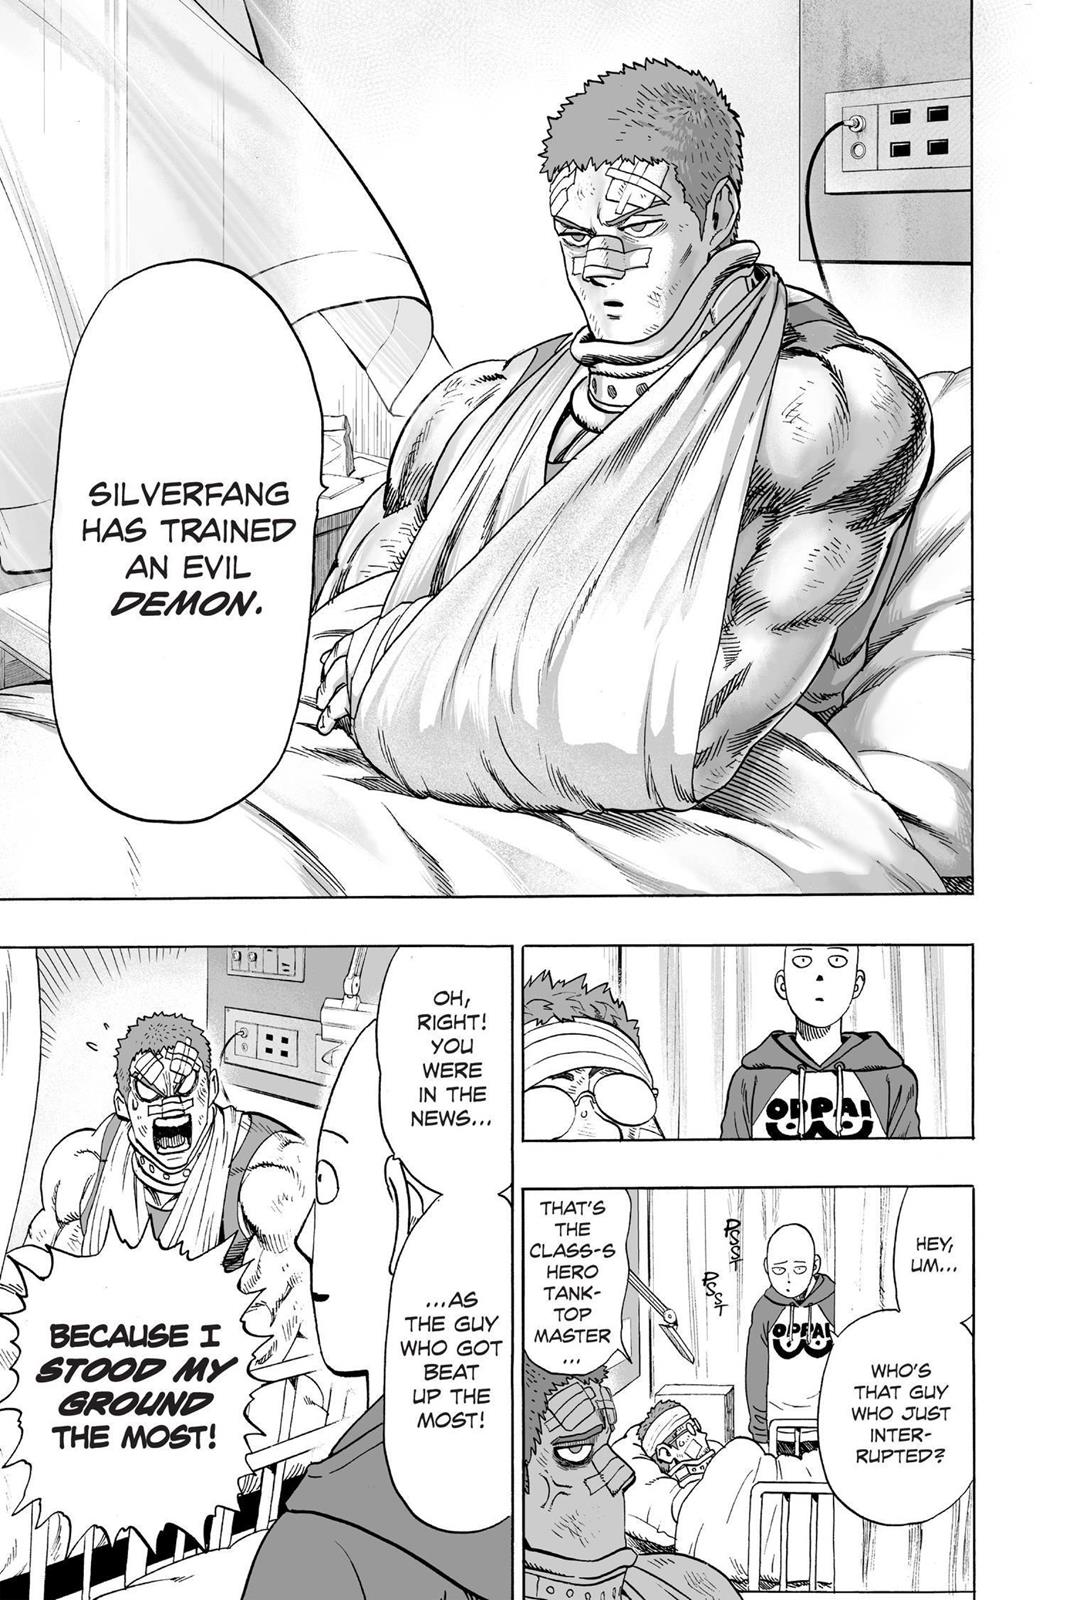 One-Punch Man, Punch 48 image 16